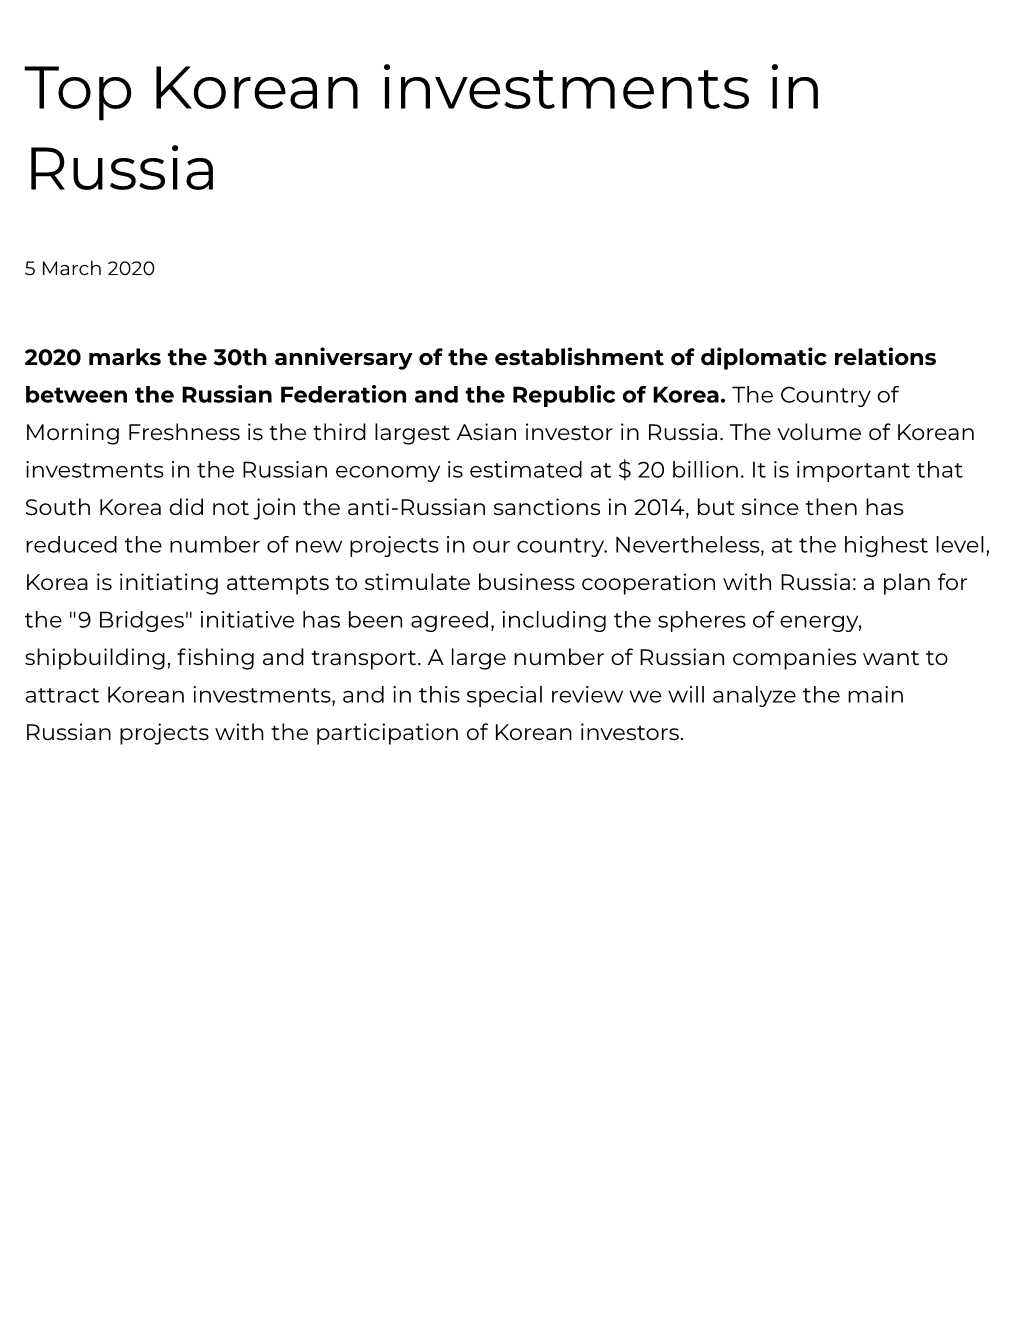 Top Korean Investments in Russia